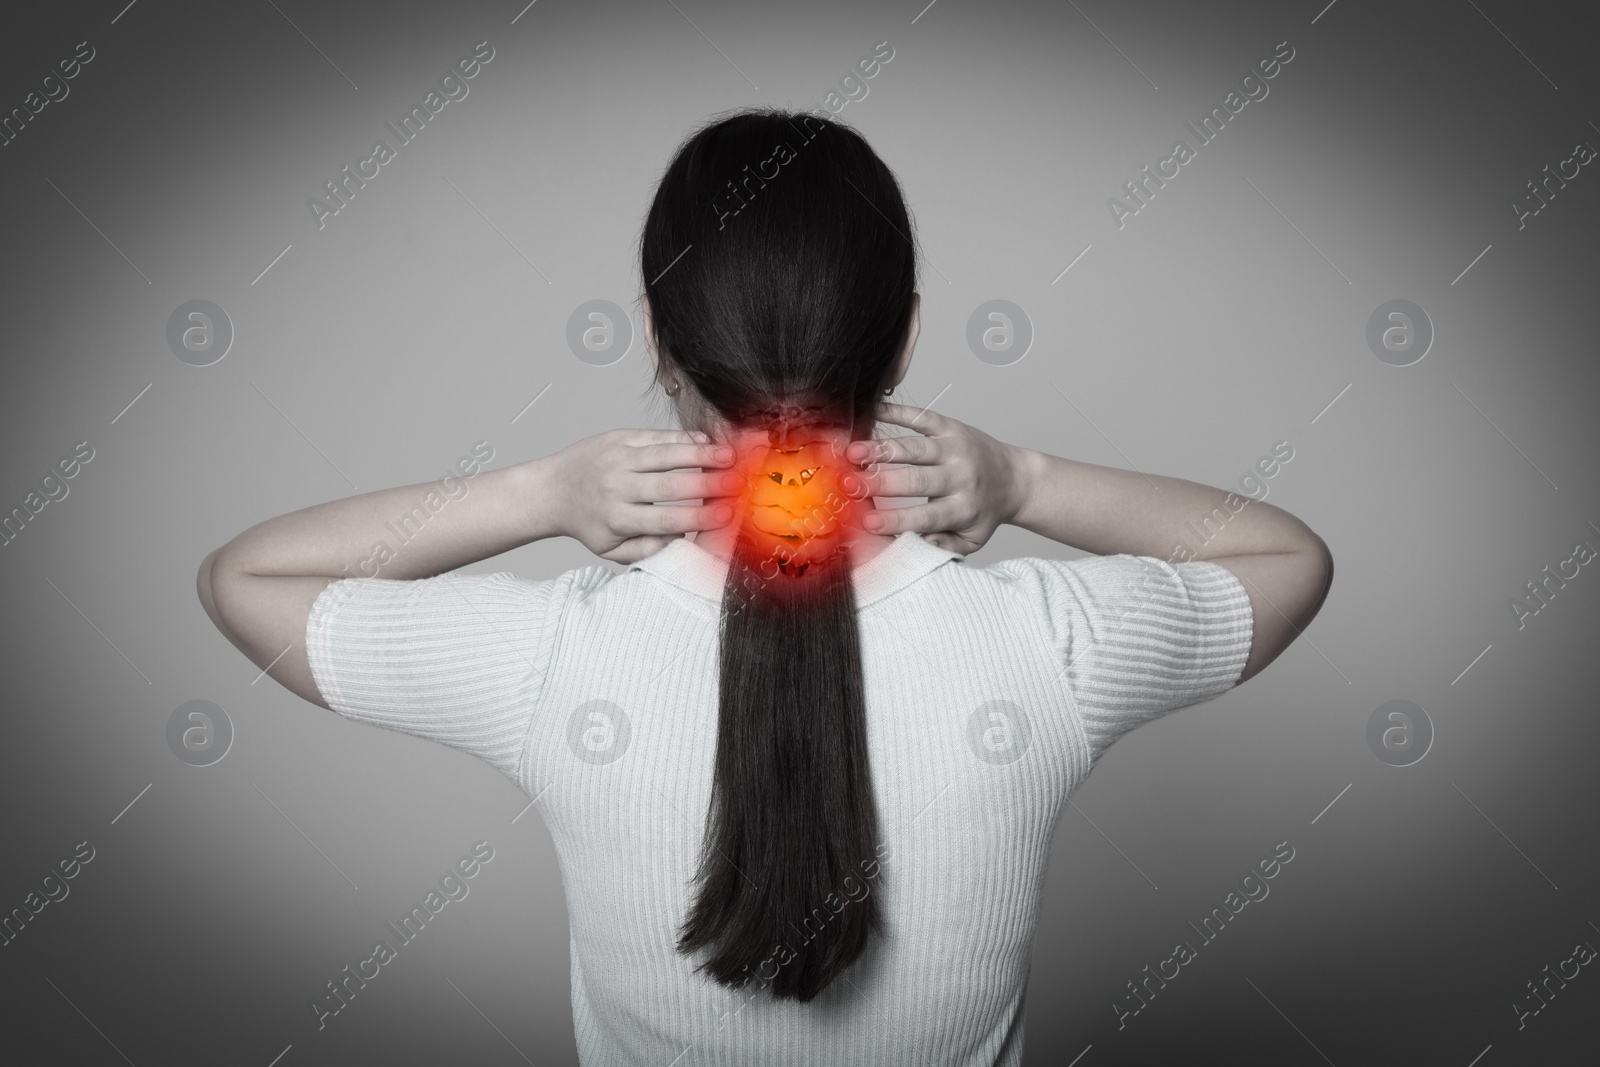 Image of Arthritis symptoms. Young woman suffering from pain in neck on light grey background, back view